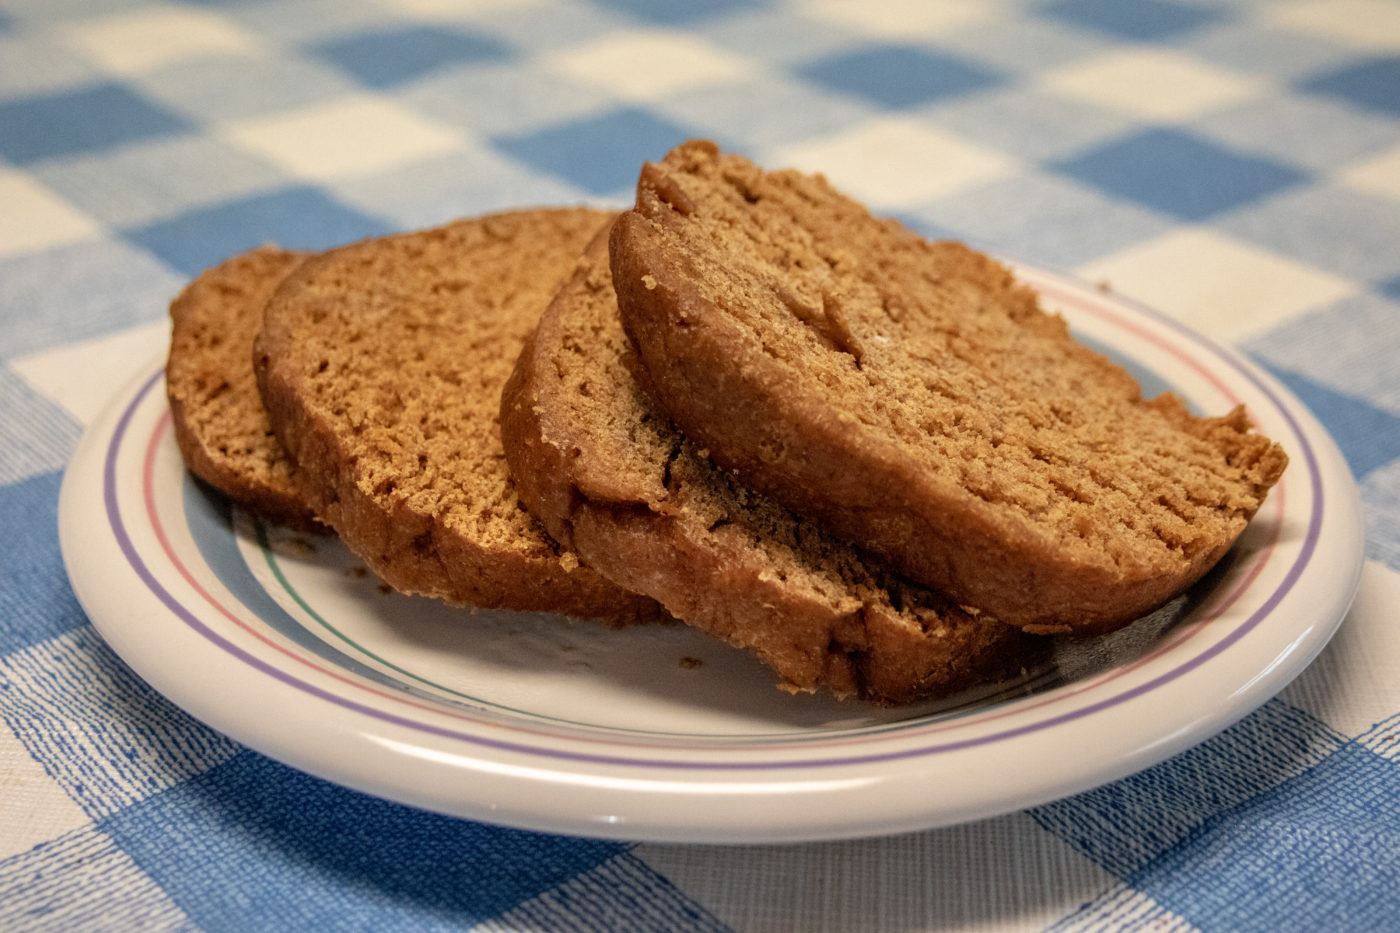 Icelandic Thunder Bread – A Delicious, Sweet Rye Bread Geothermally Cooked